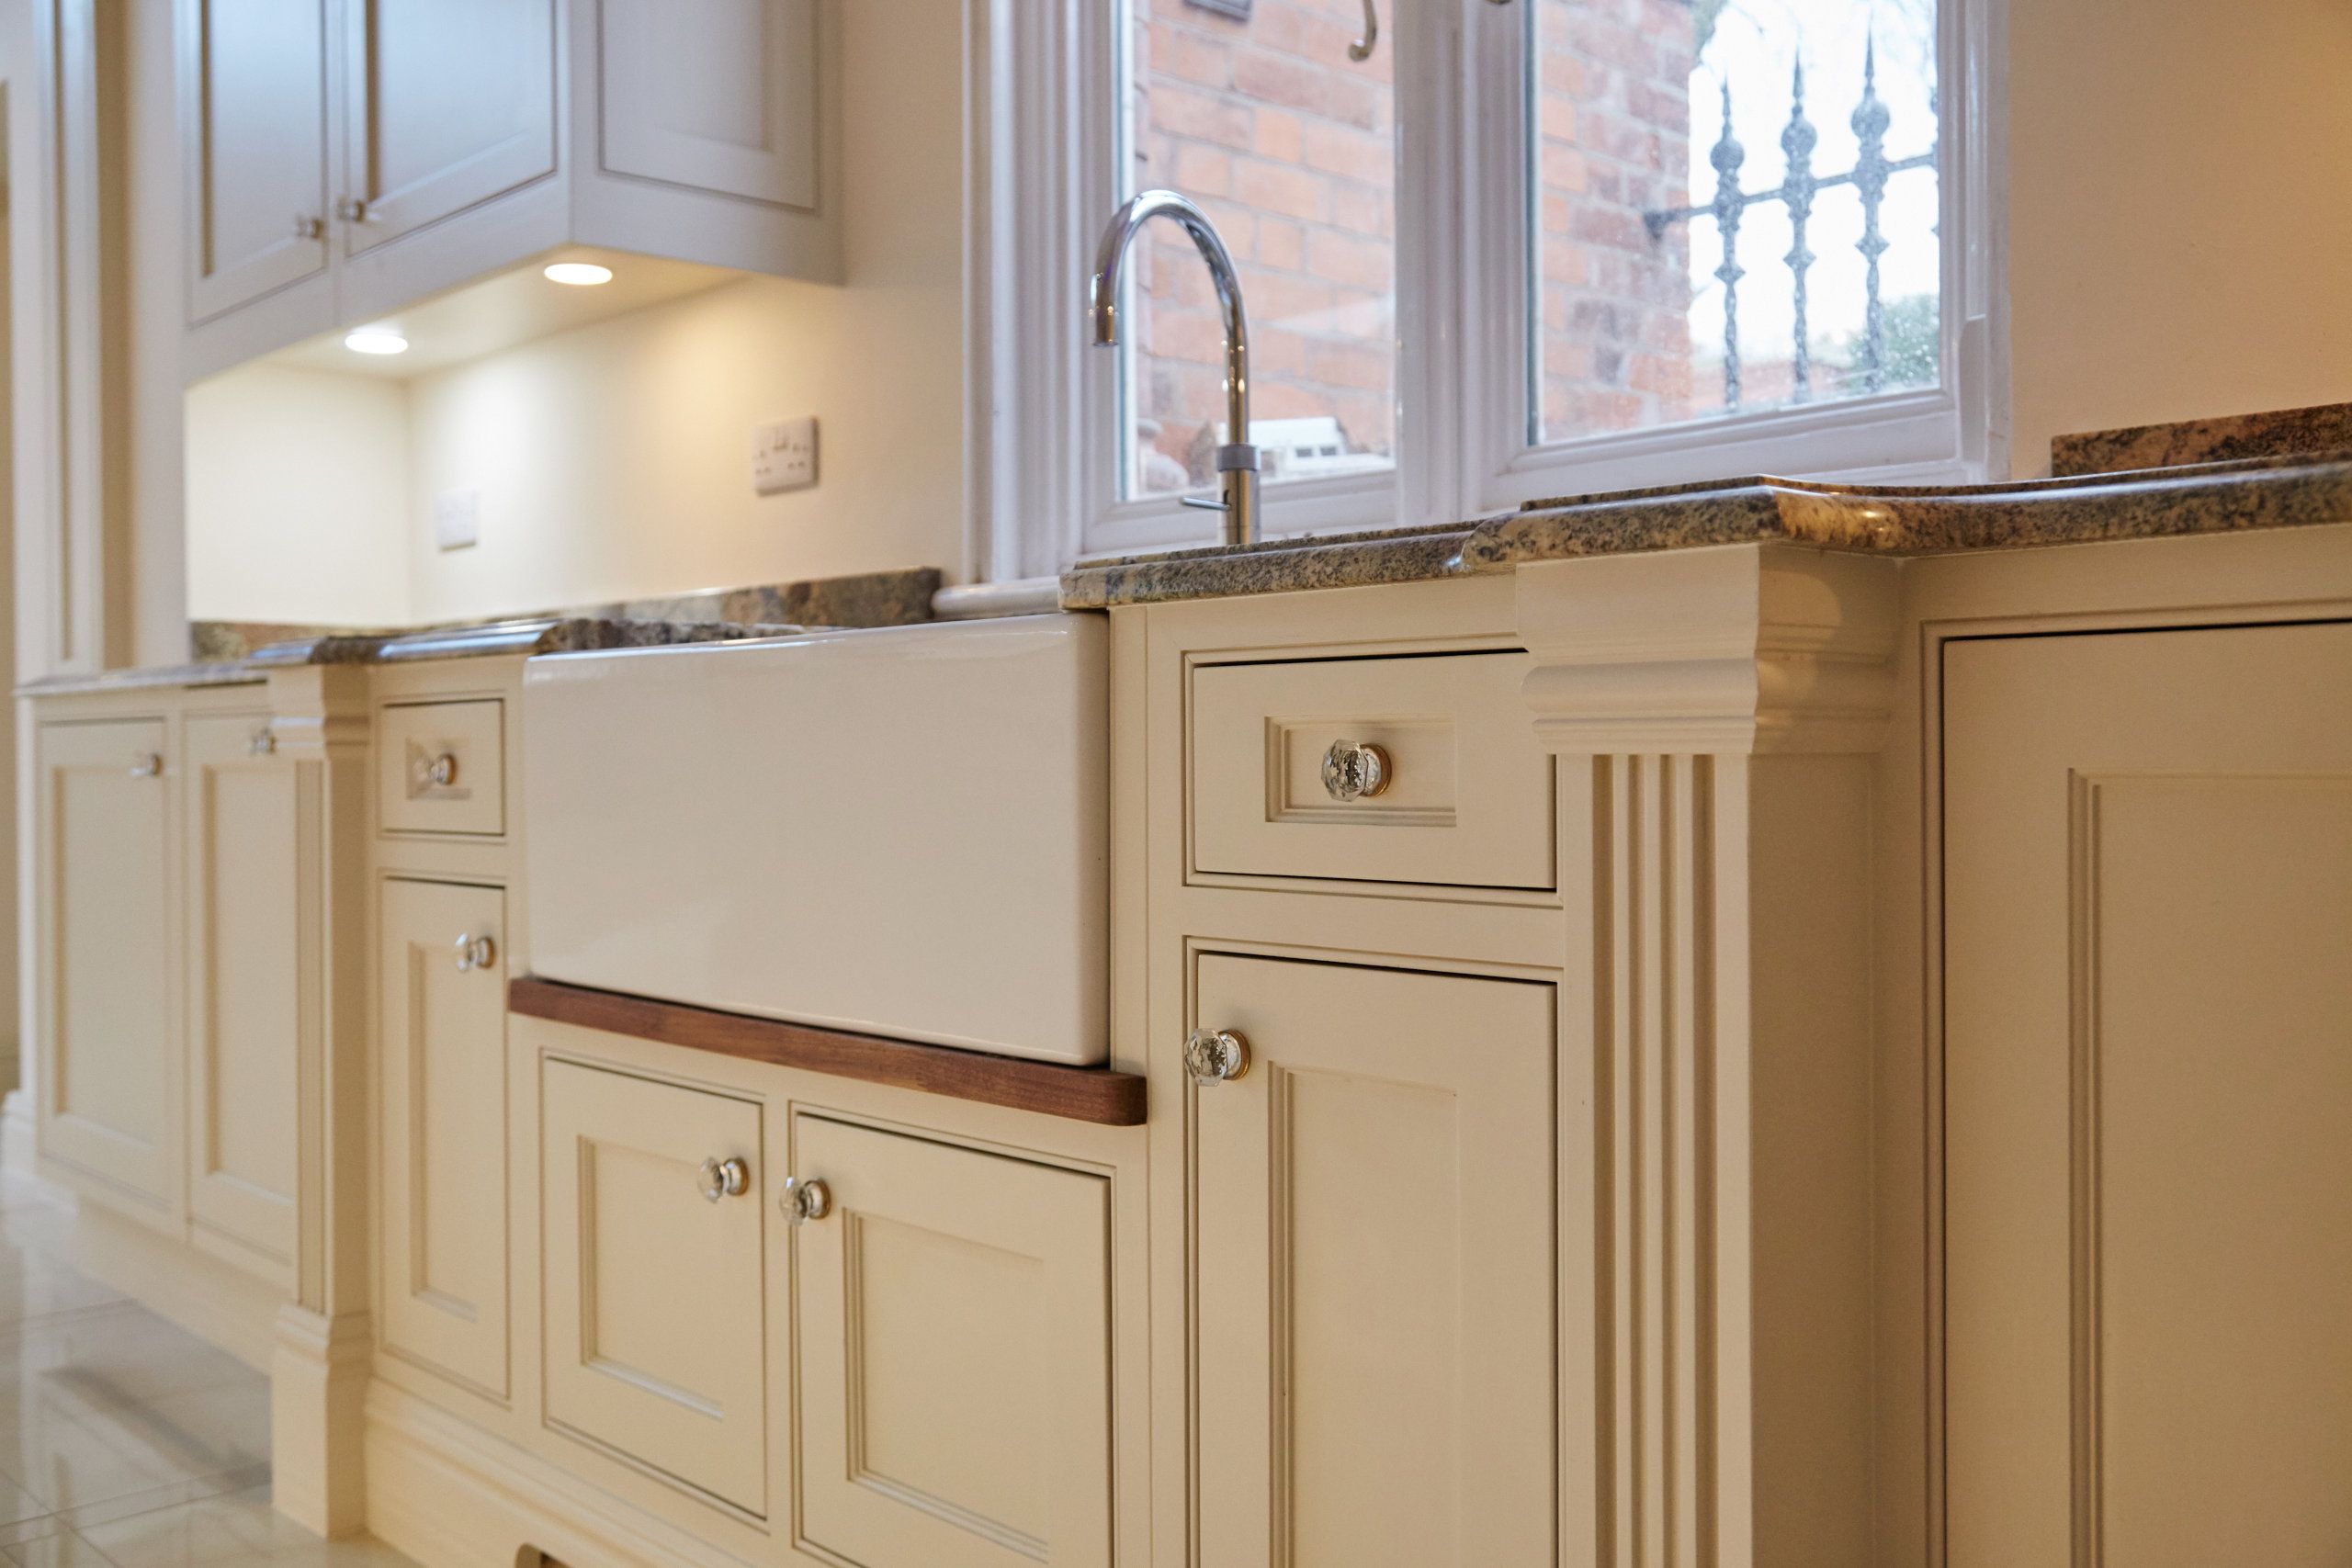 A large basin sink can be seen set in to the centre of a series of bespoke, traditional kitchen cabinets.